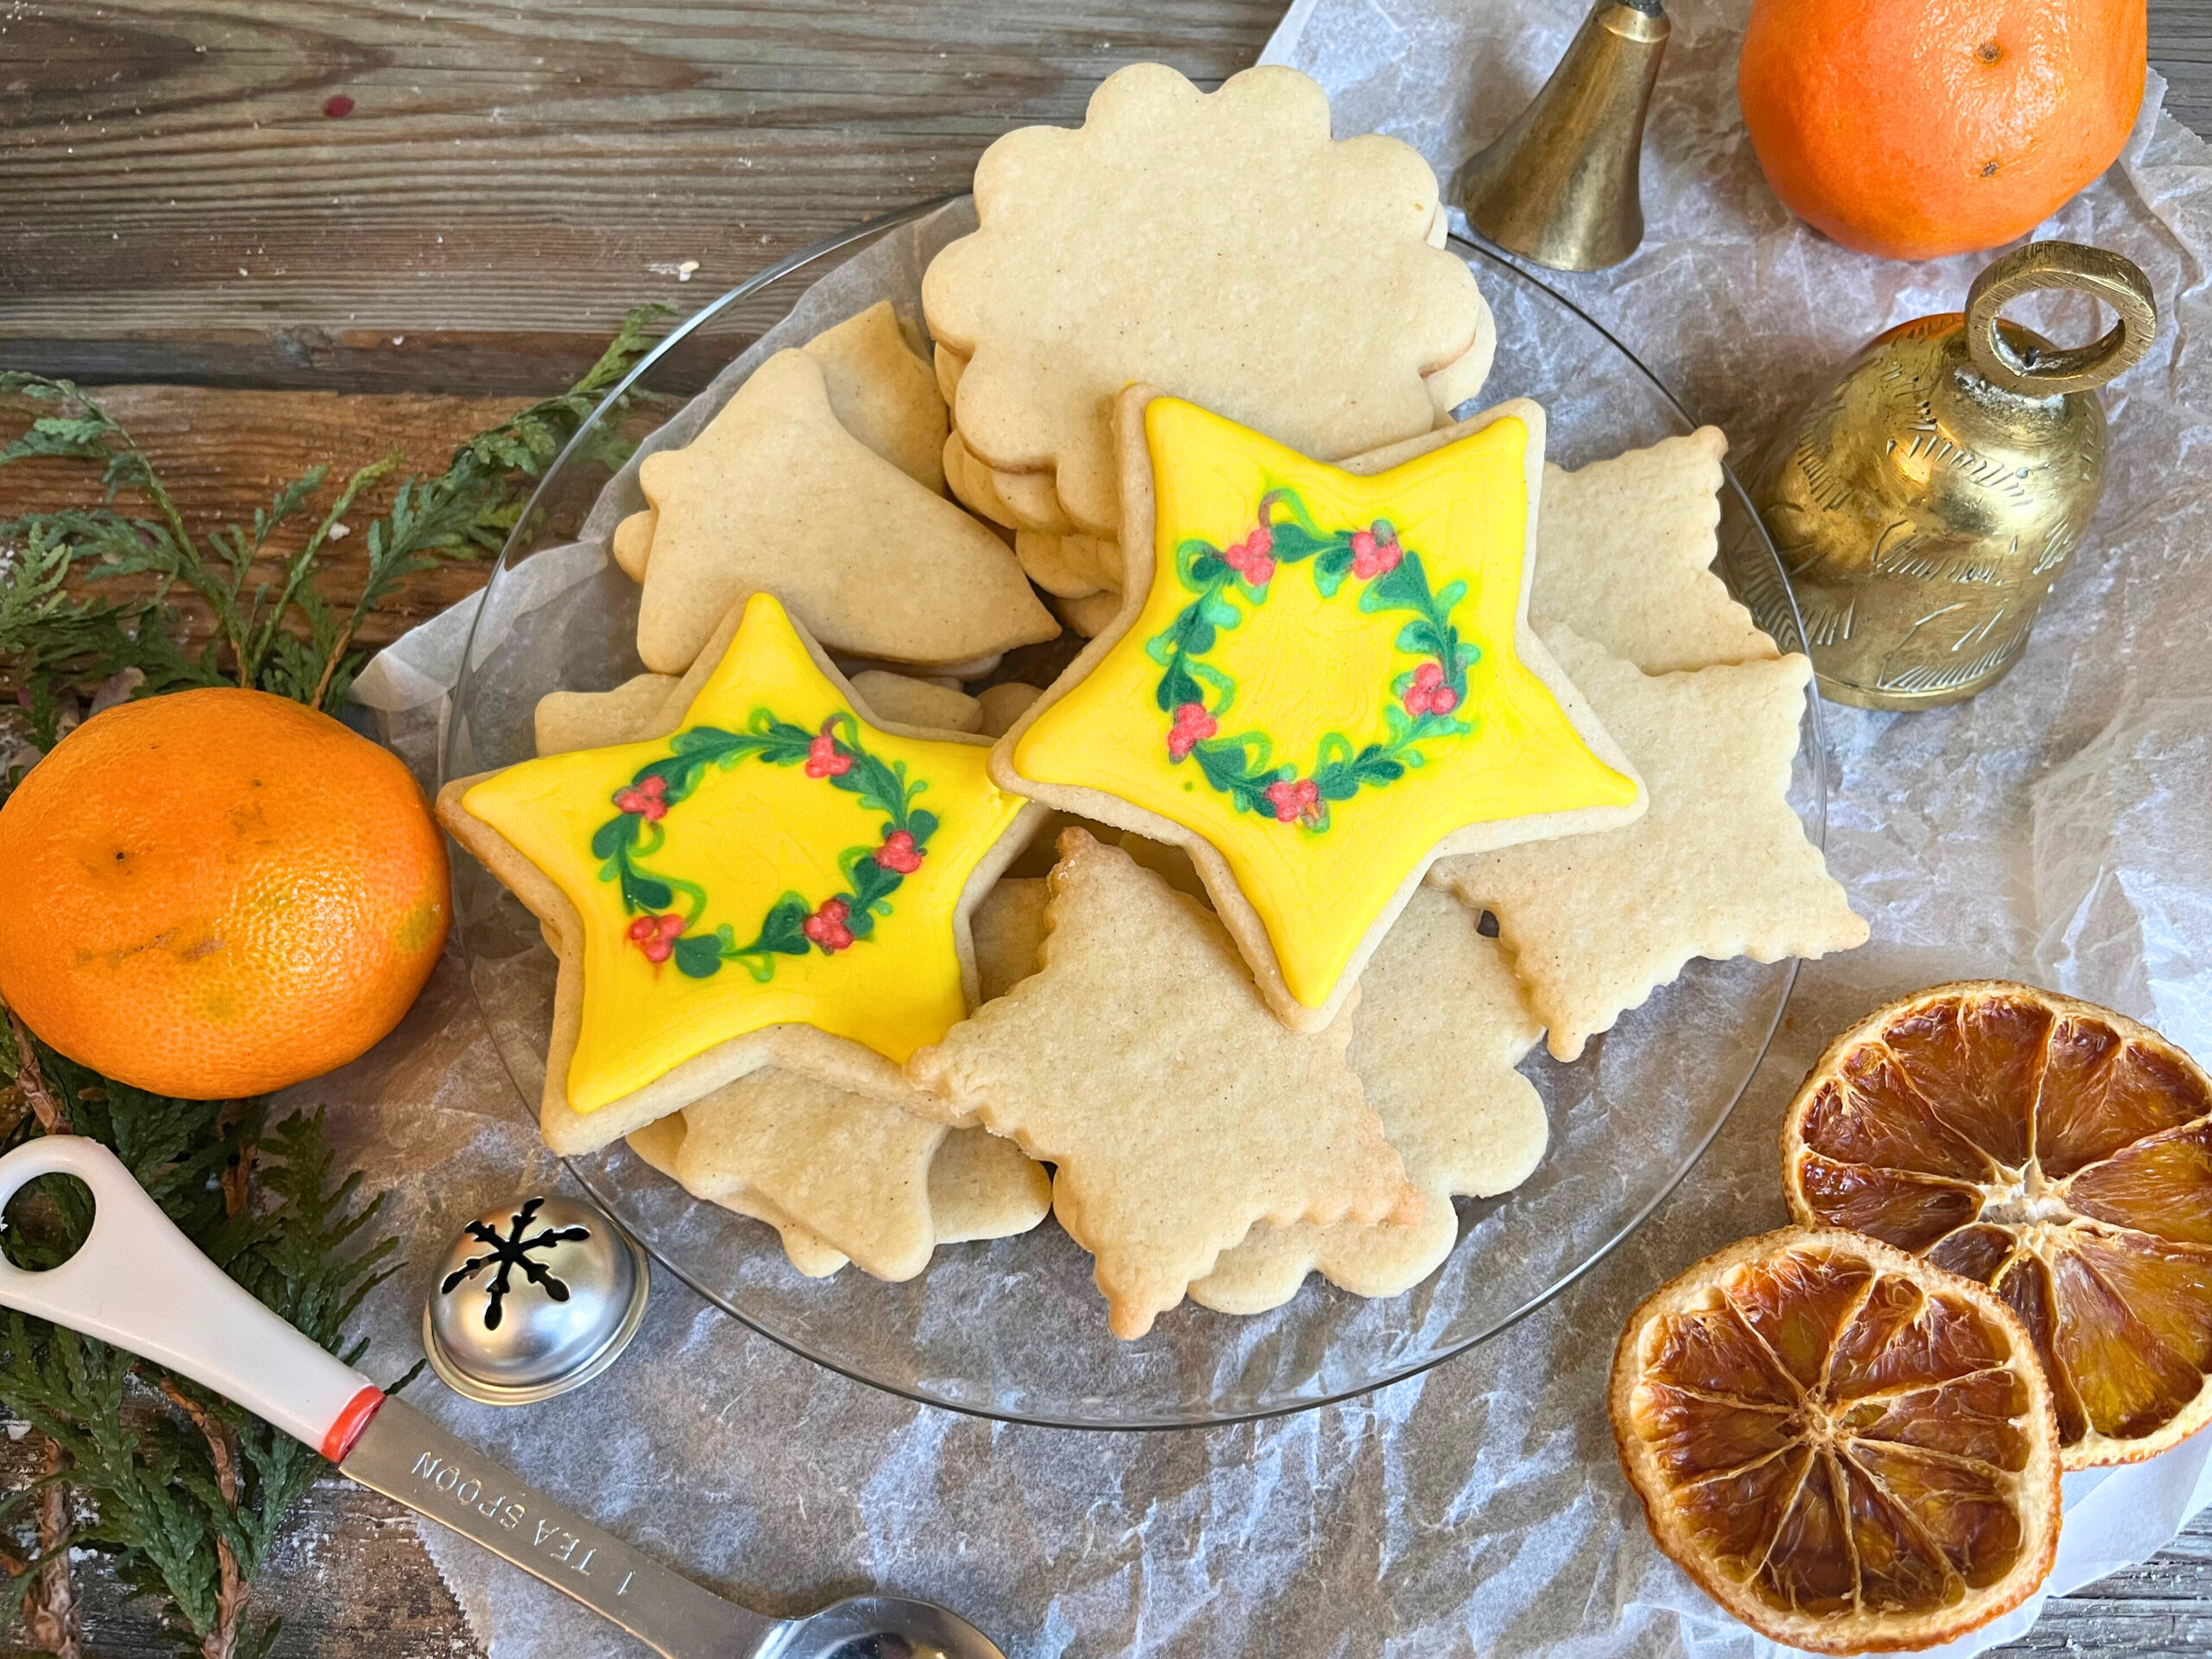 A plate of sugar cookies. Two of the cookies are decorated stars with wreaths in the middle.